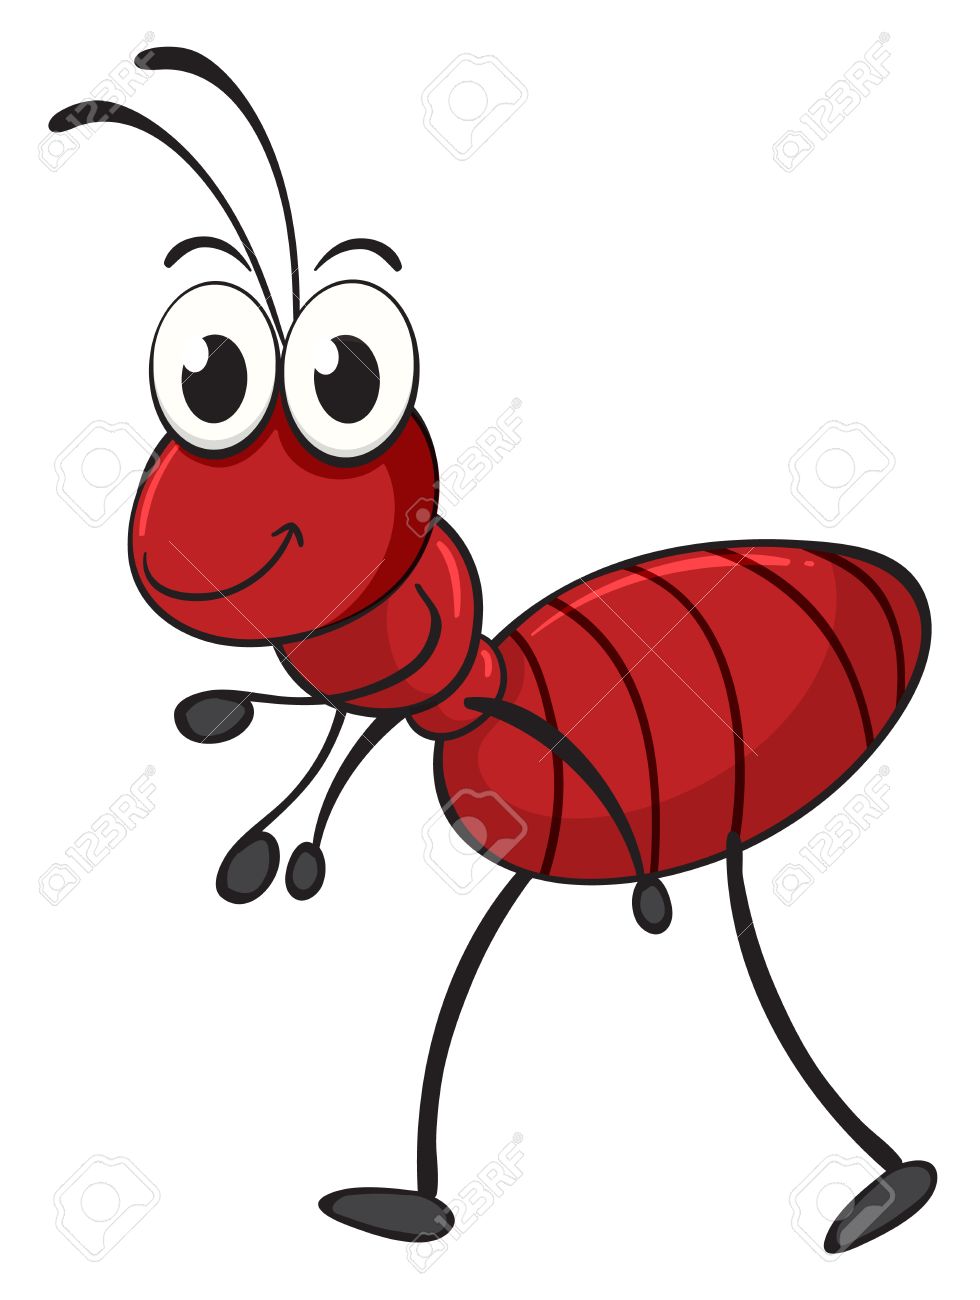 Cartoon Ants Clipart | Free download on ClipArtMag